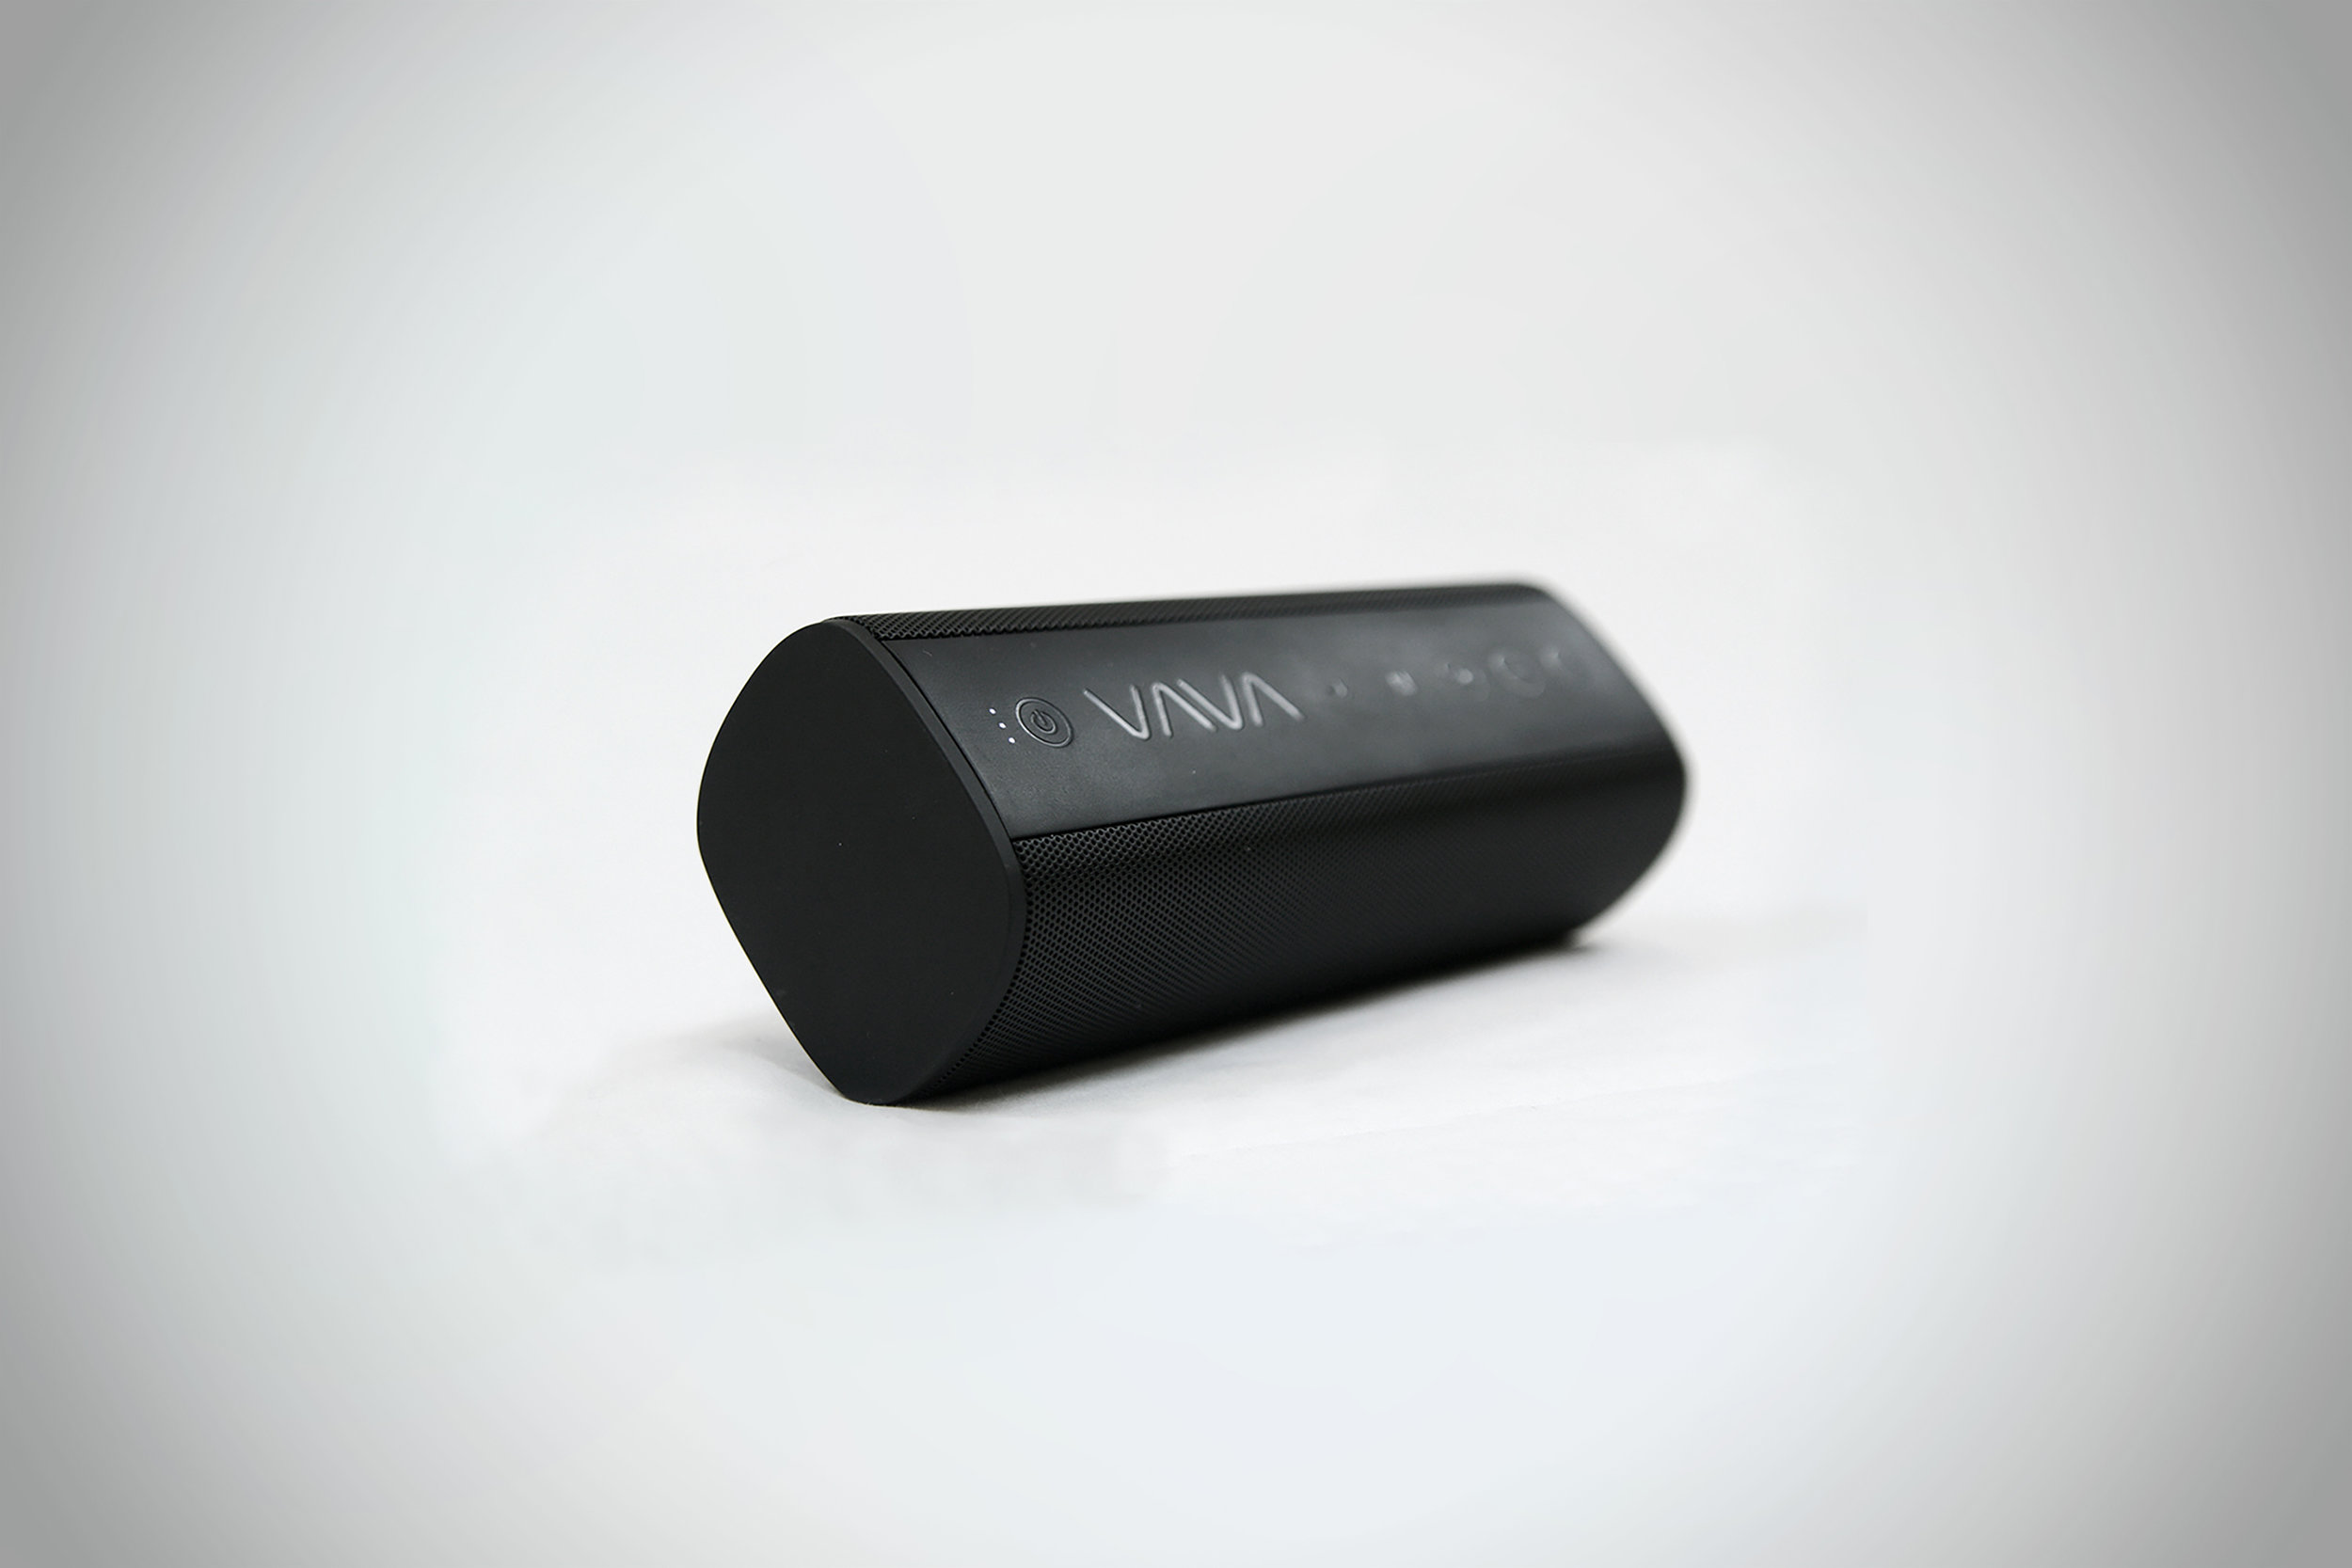 VAVA's new dash cam lets you video while you voom